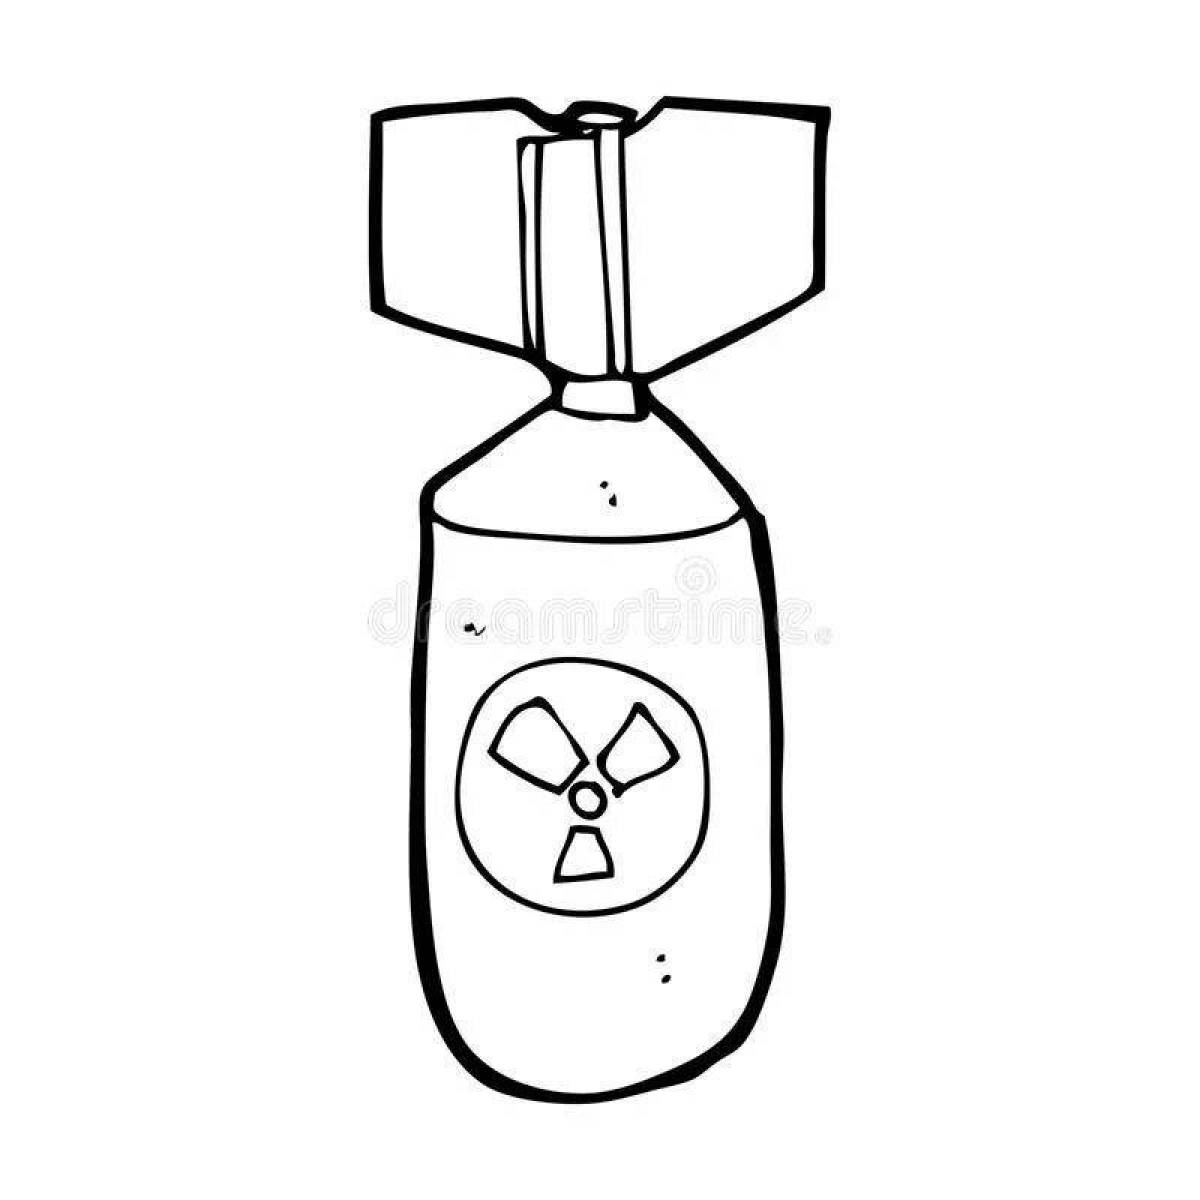 Nuclear bomb playful coloring page